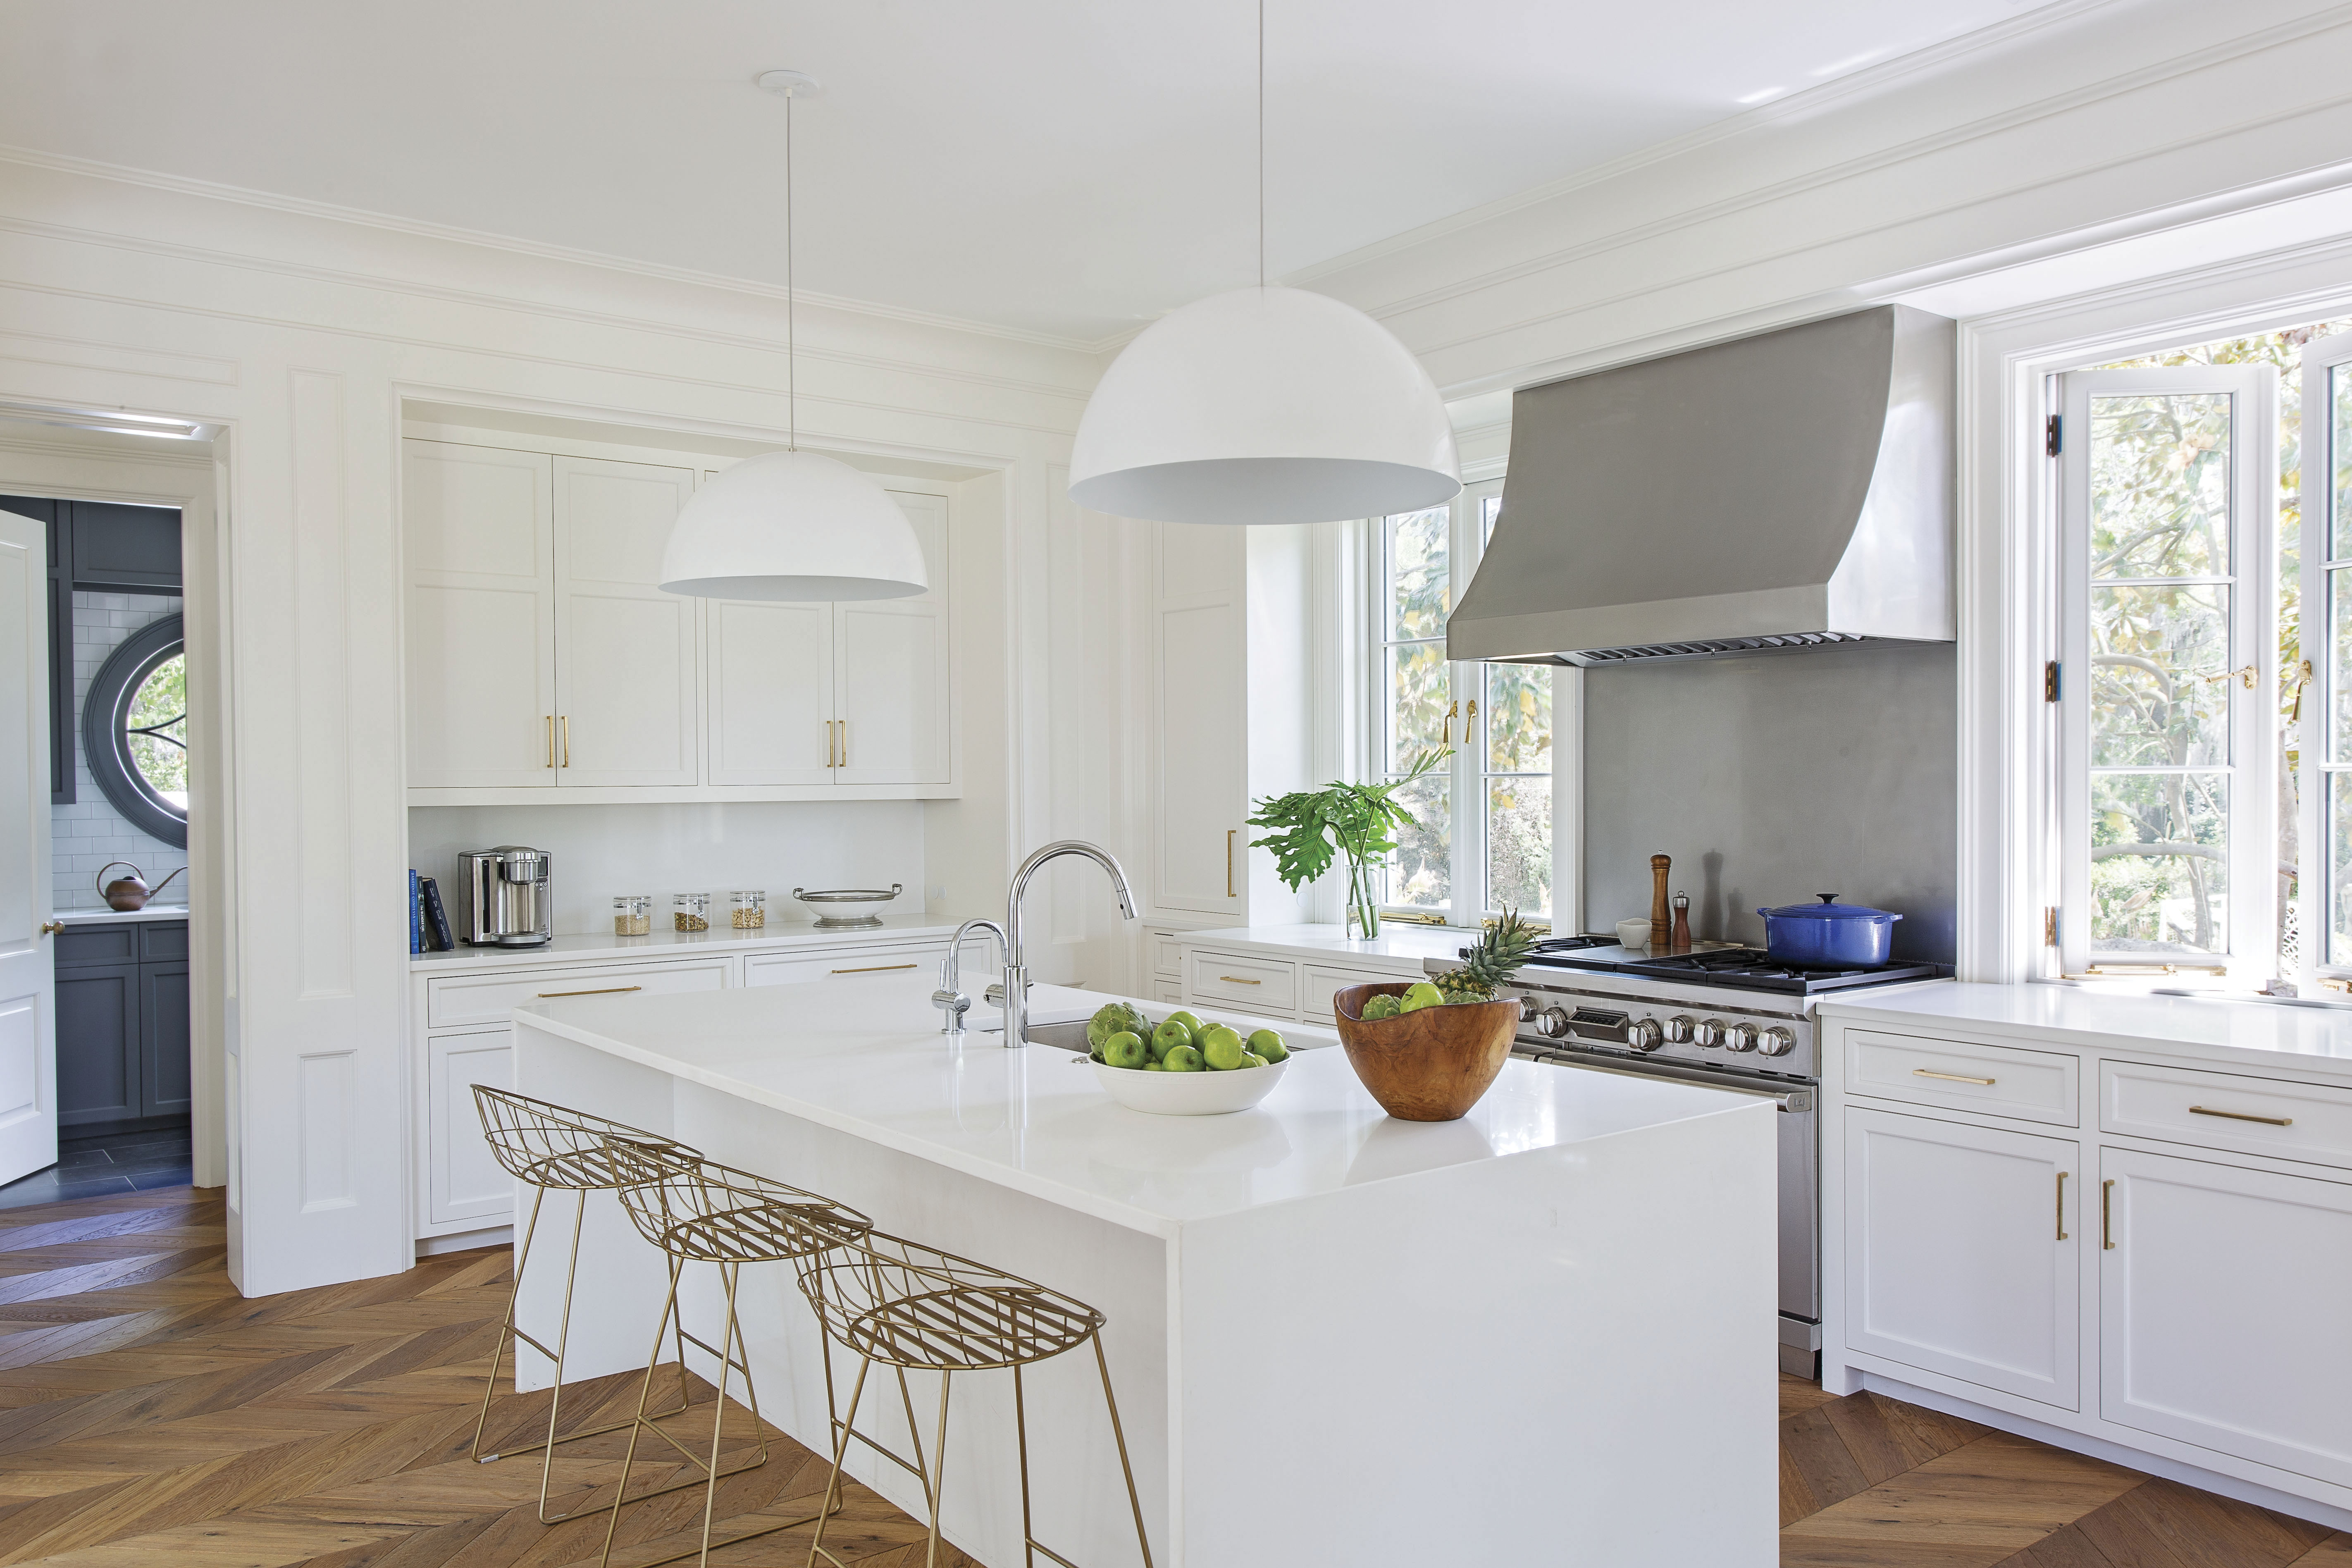 In the kitchen, Benjamin Moore “Simply White”-painted walls allow the stainless steel Wolf stove to pop against quartz countertops.